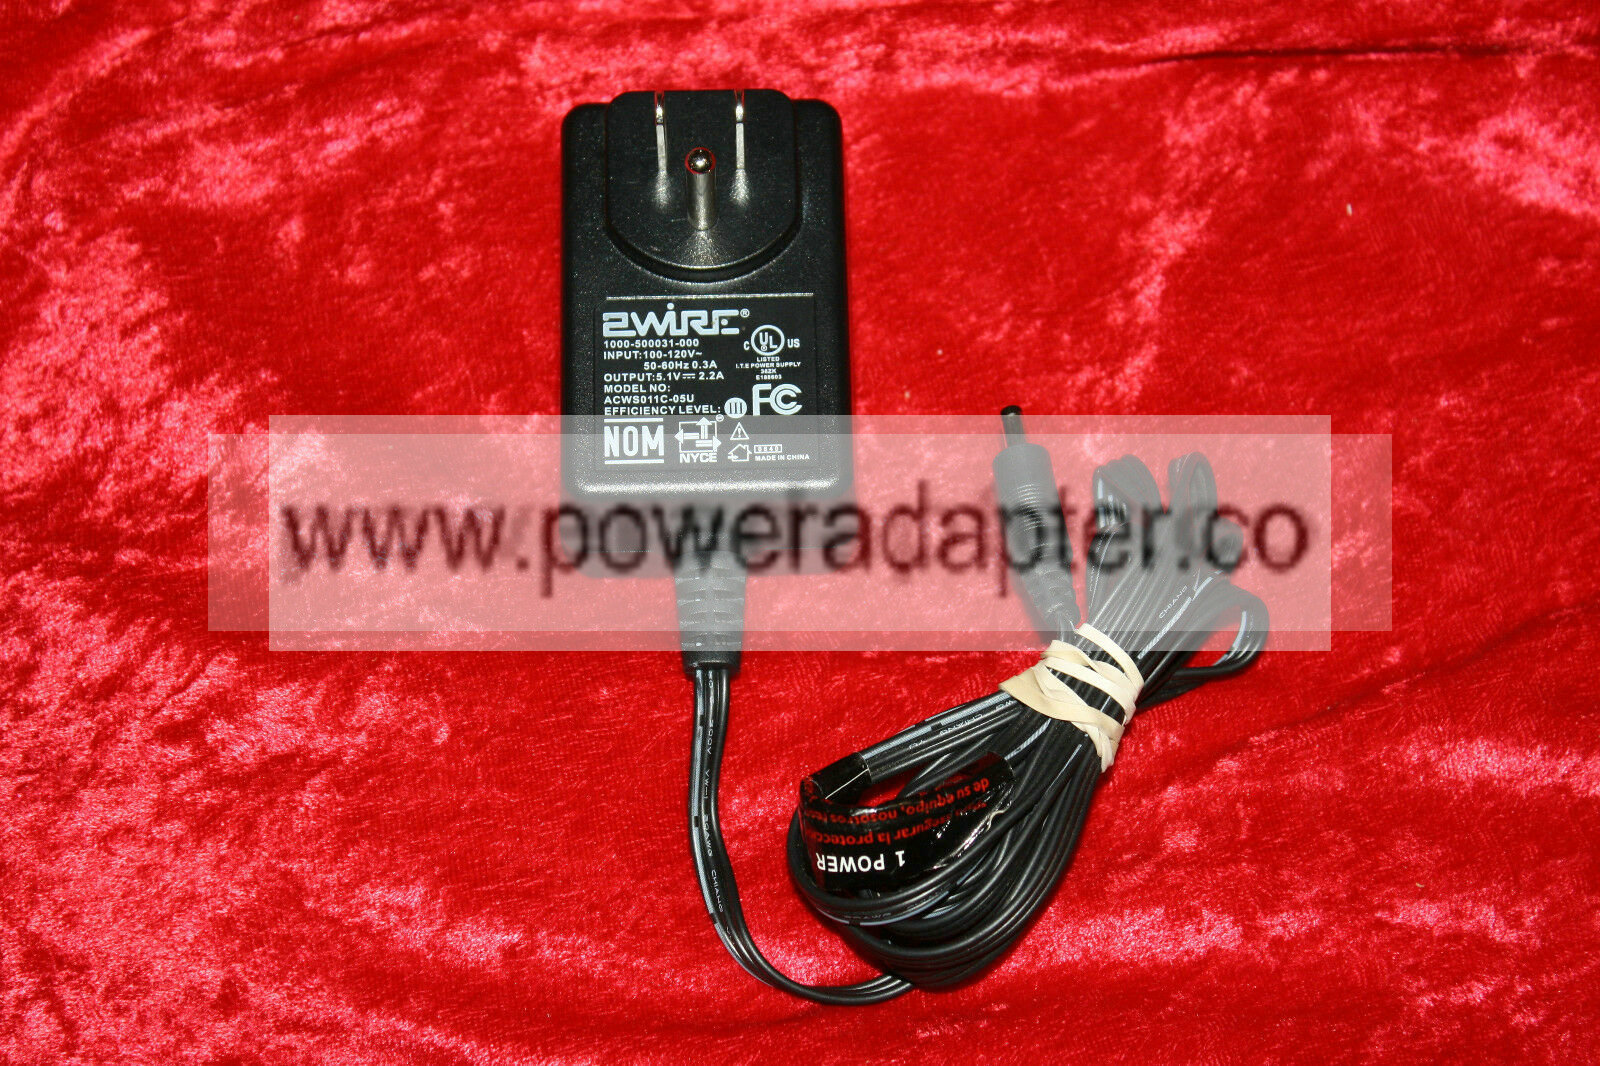 2WIRE AC Adapter 1000-500031-000 ACWS011C-05U 5.1V DC Power Supply Transformer Condition: Used: An item that has bee